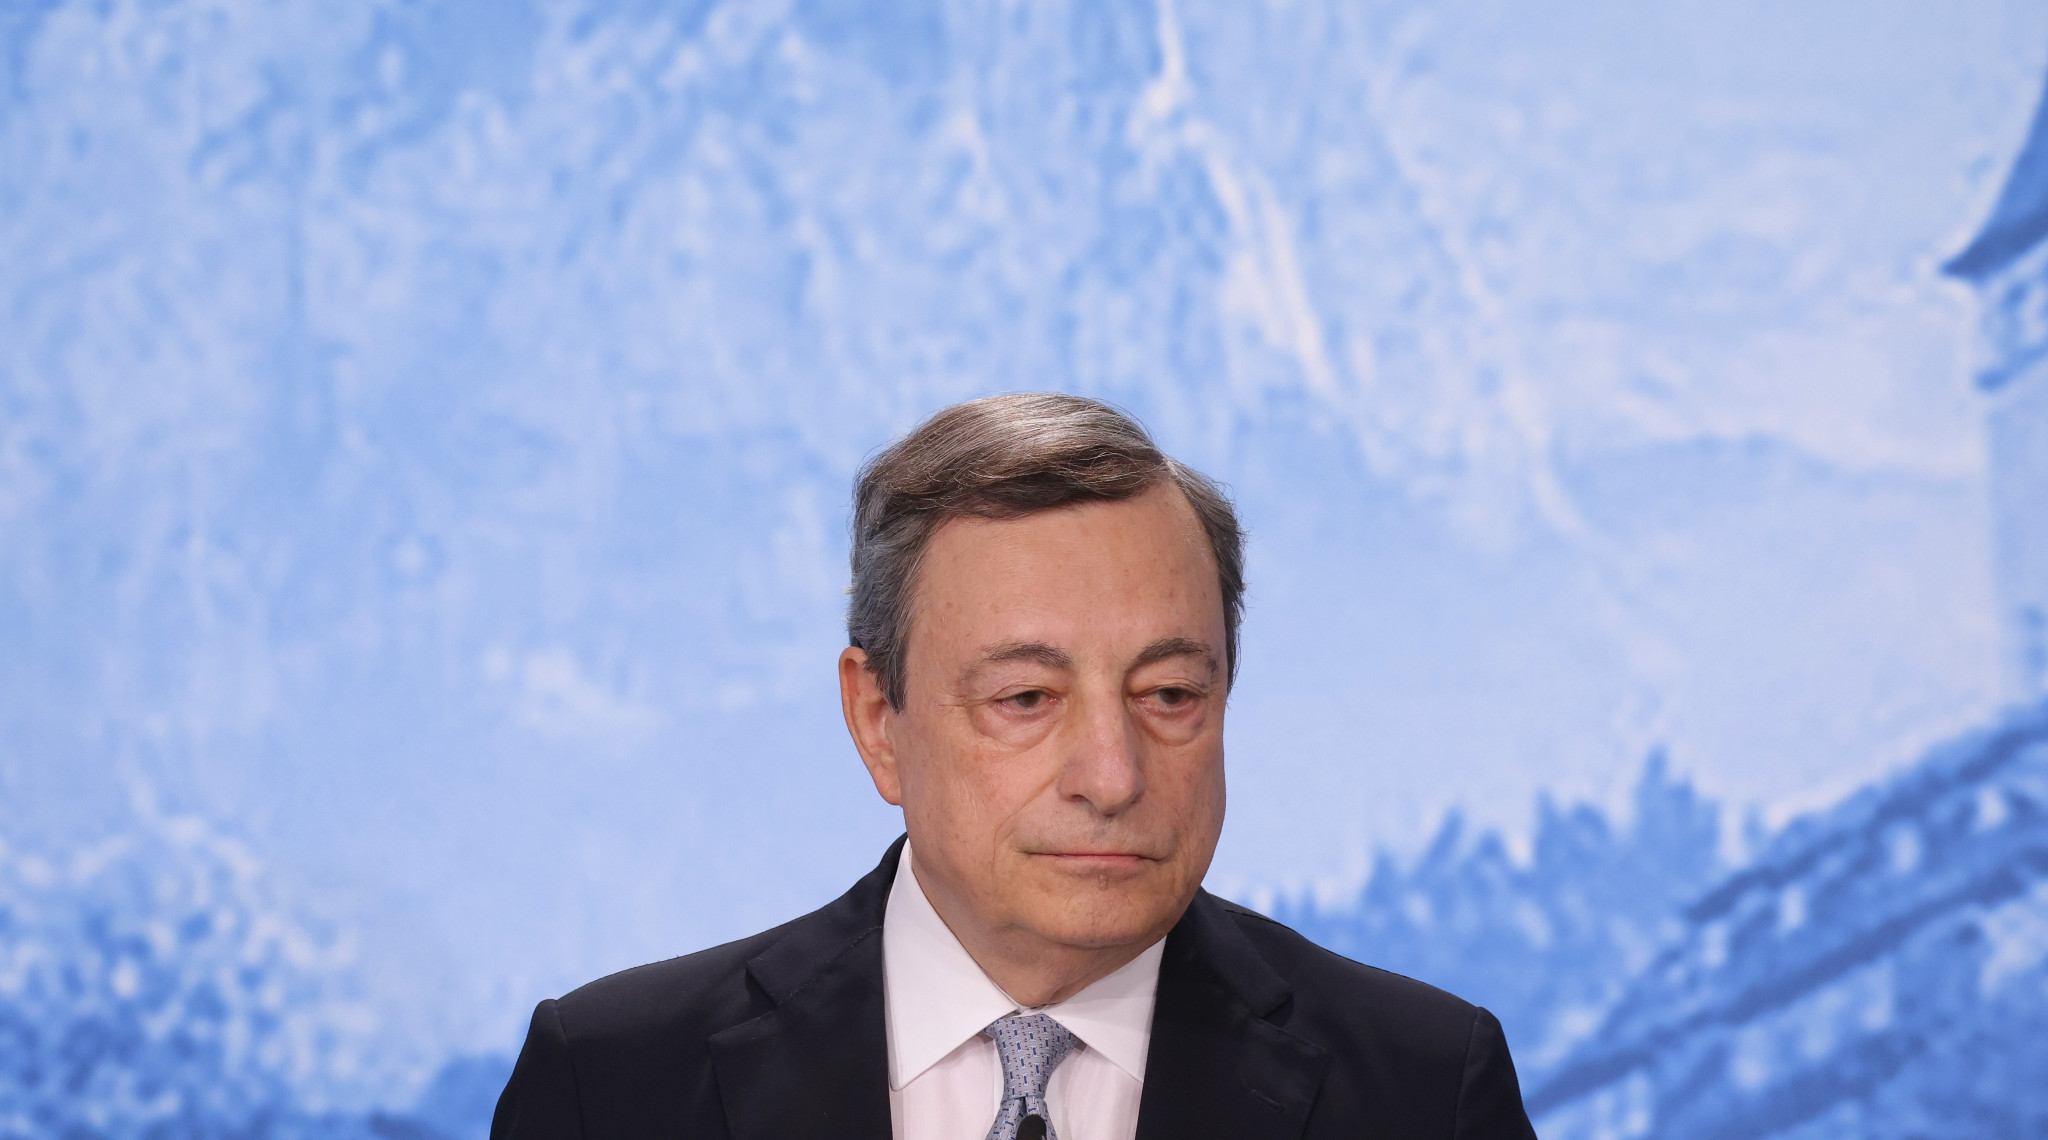 Italian Prime Minister Mario Draghi tendered his resignation, but it has not been accepted ©Getty Images